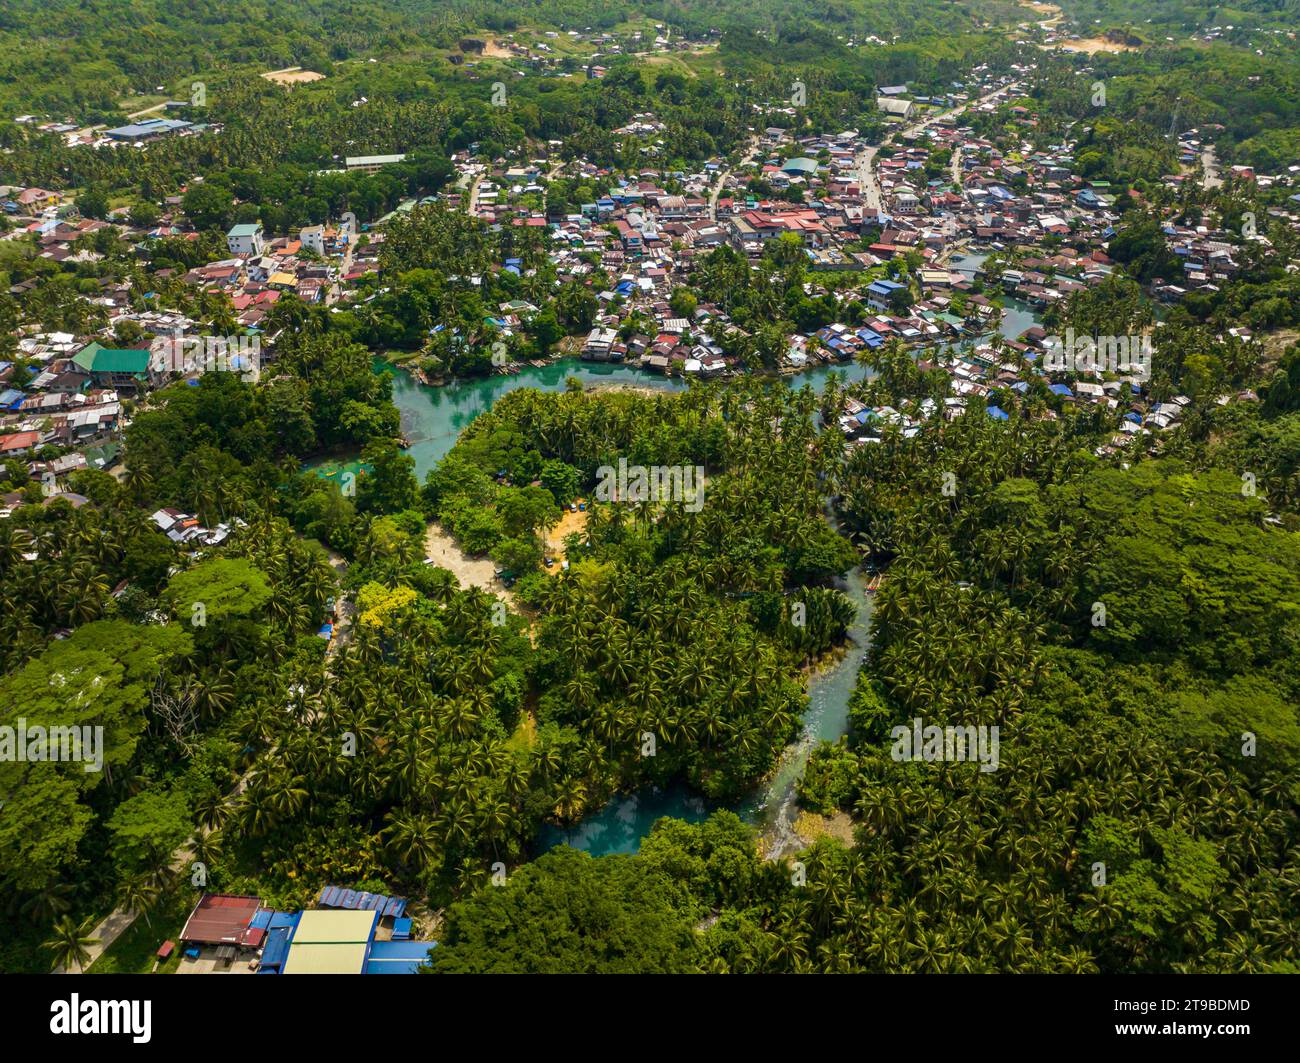 Barobo town with houses and buildings. River surrounded bt green plants and trees in Surigao del Sur. Philippines. Stock Photo